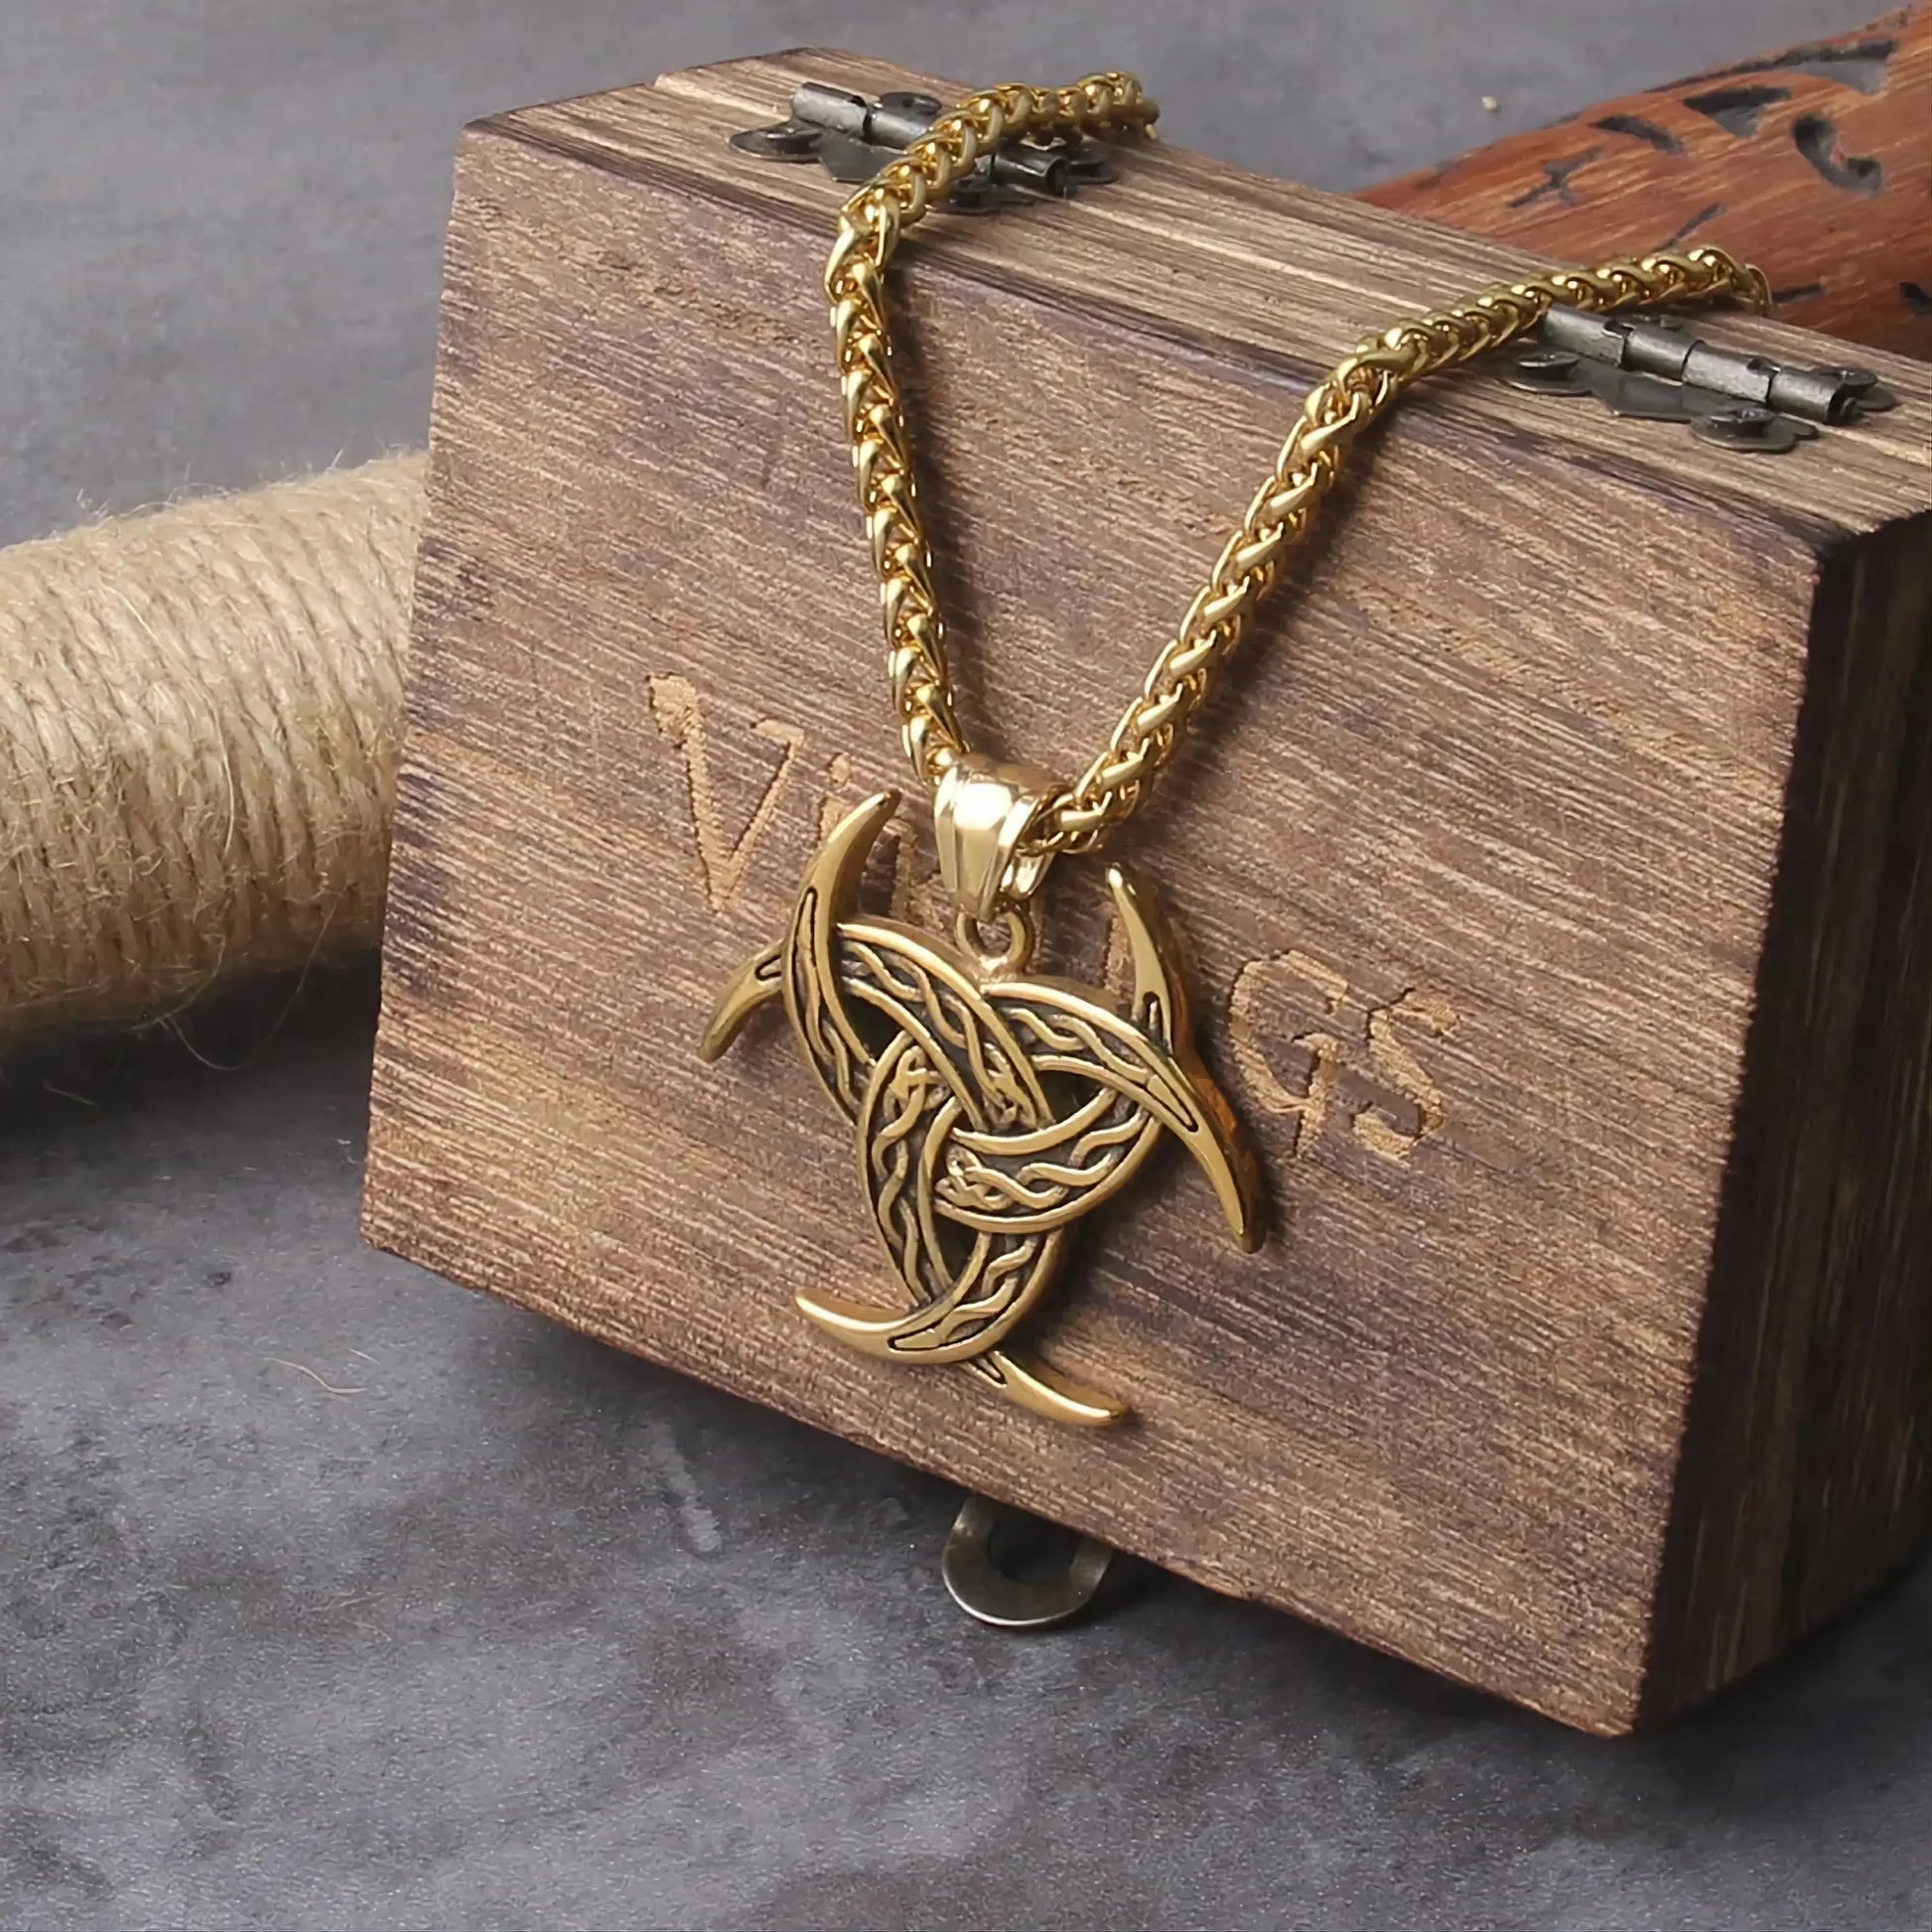 Gold Viking Trinity Pendant Necklace with Free Box and Gift Bag Steel Jewelry Necklace JettsJewelers